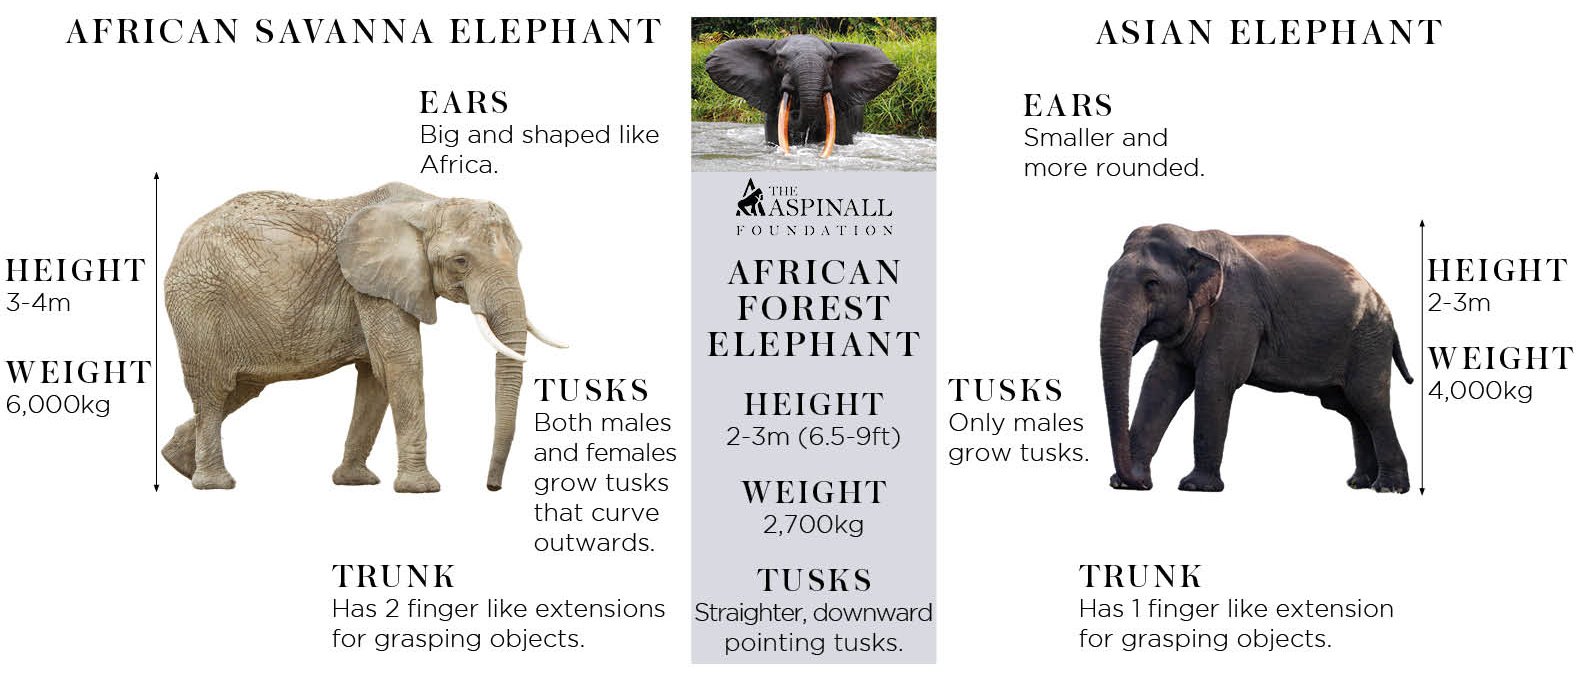 African Or Asian Elephant Graphic 1 ?width=3160&name=African Or Asian Elephant Graphic 1 